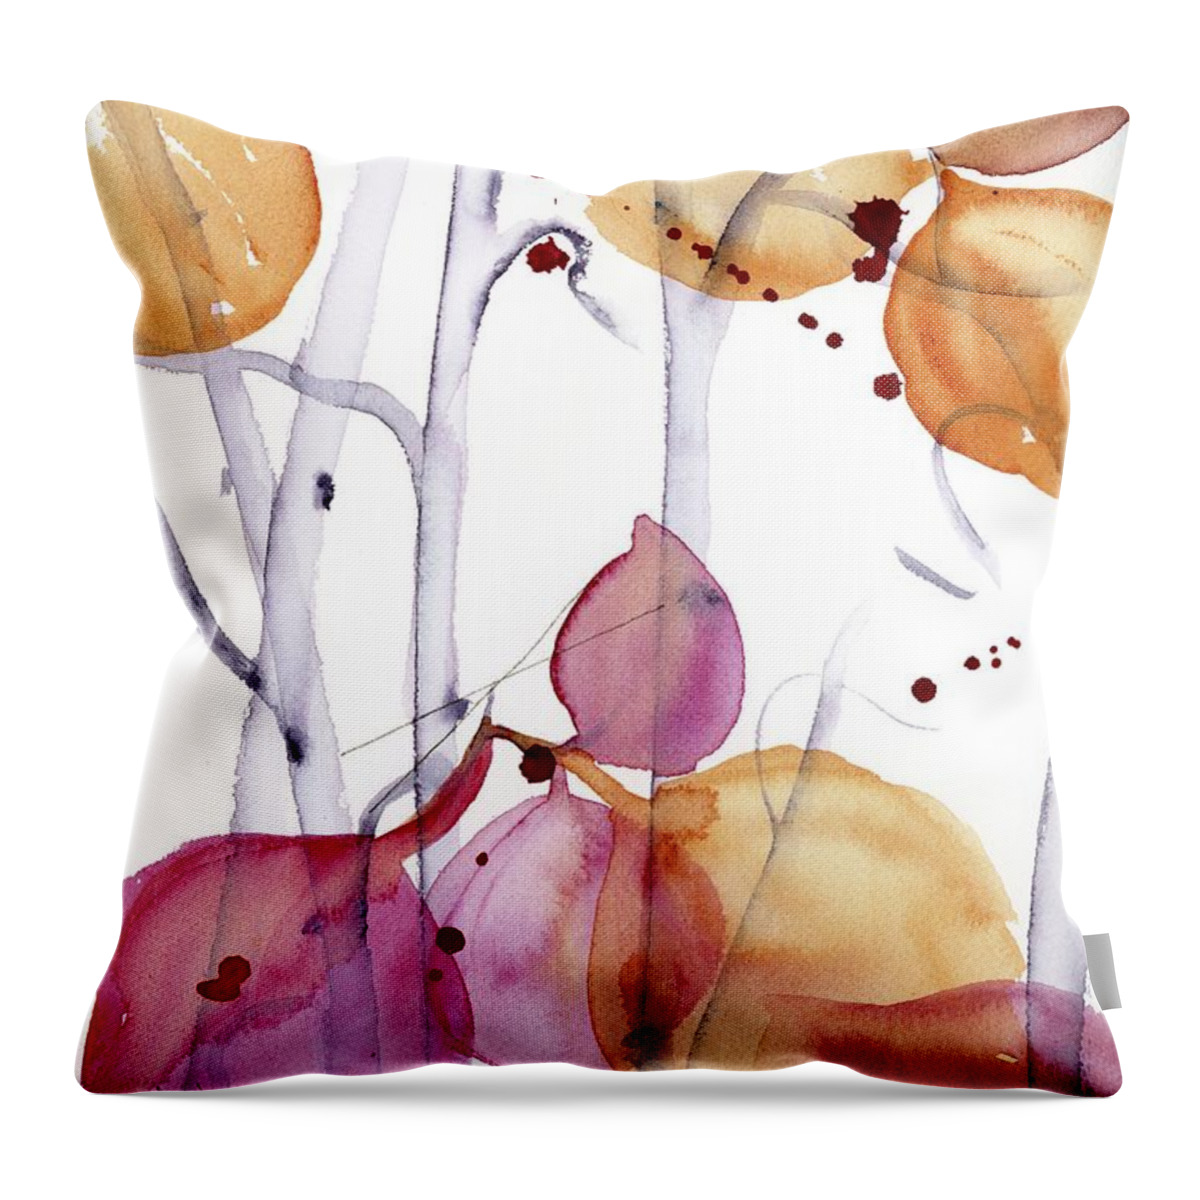 Autumn Leaves Throw Pillow featuring the painting Autumn Leaves by Dawn Derman